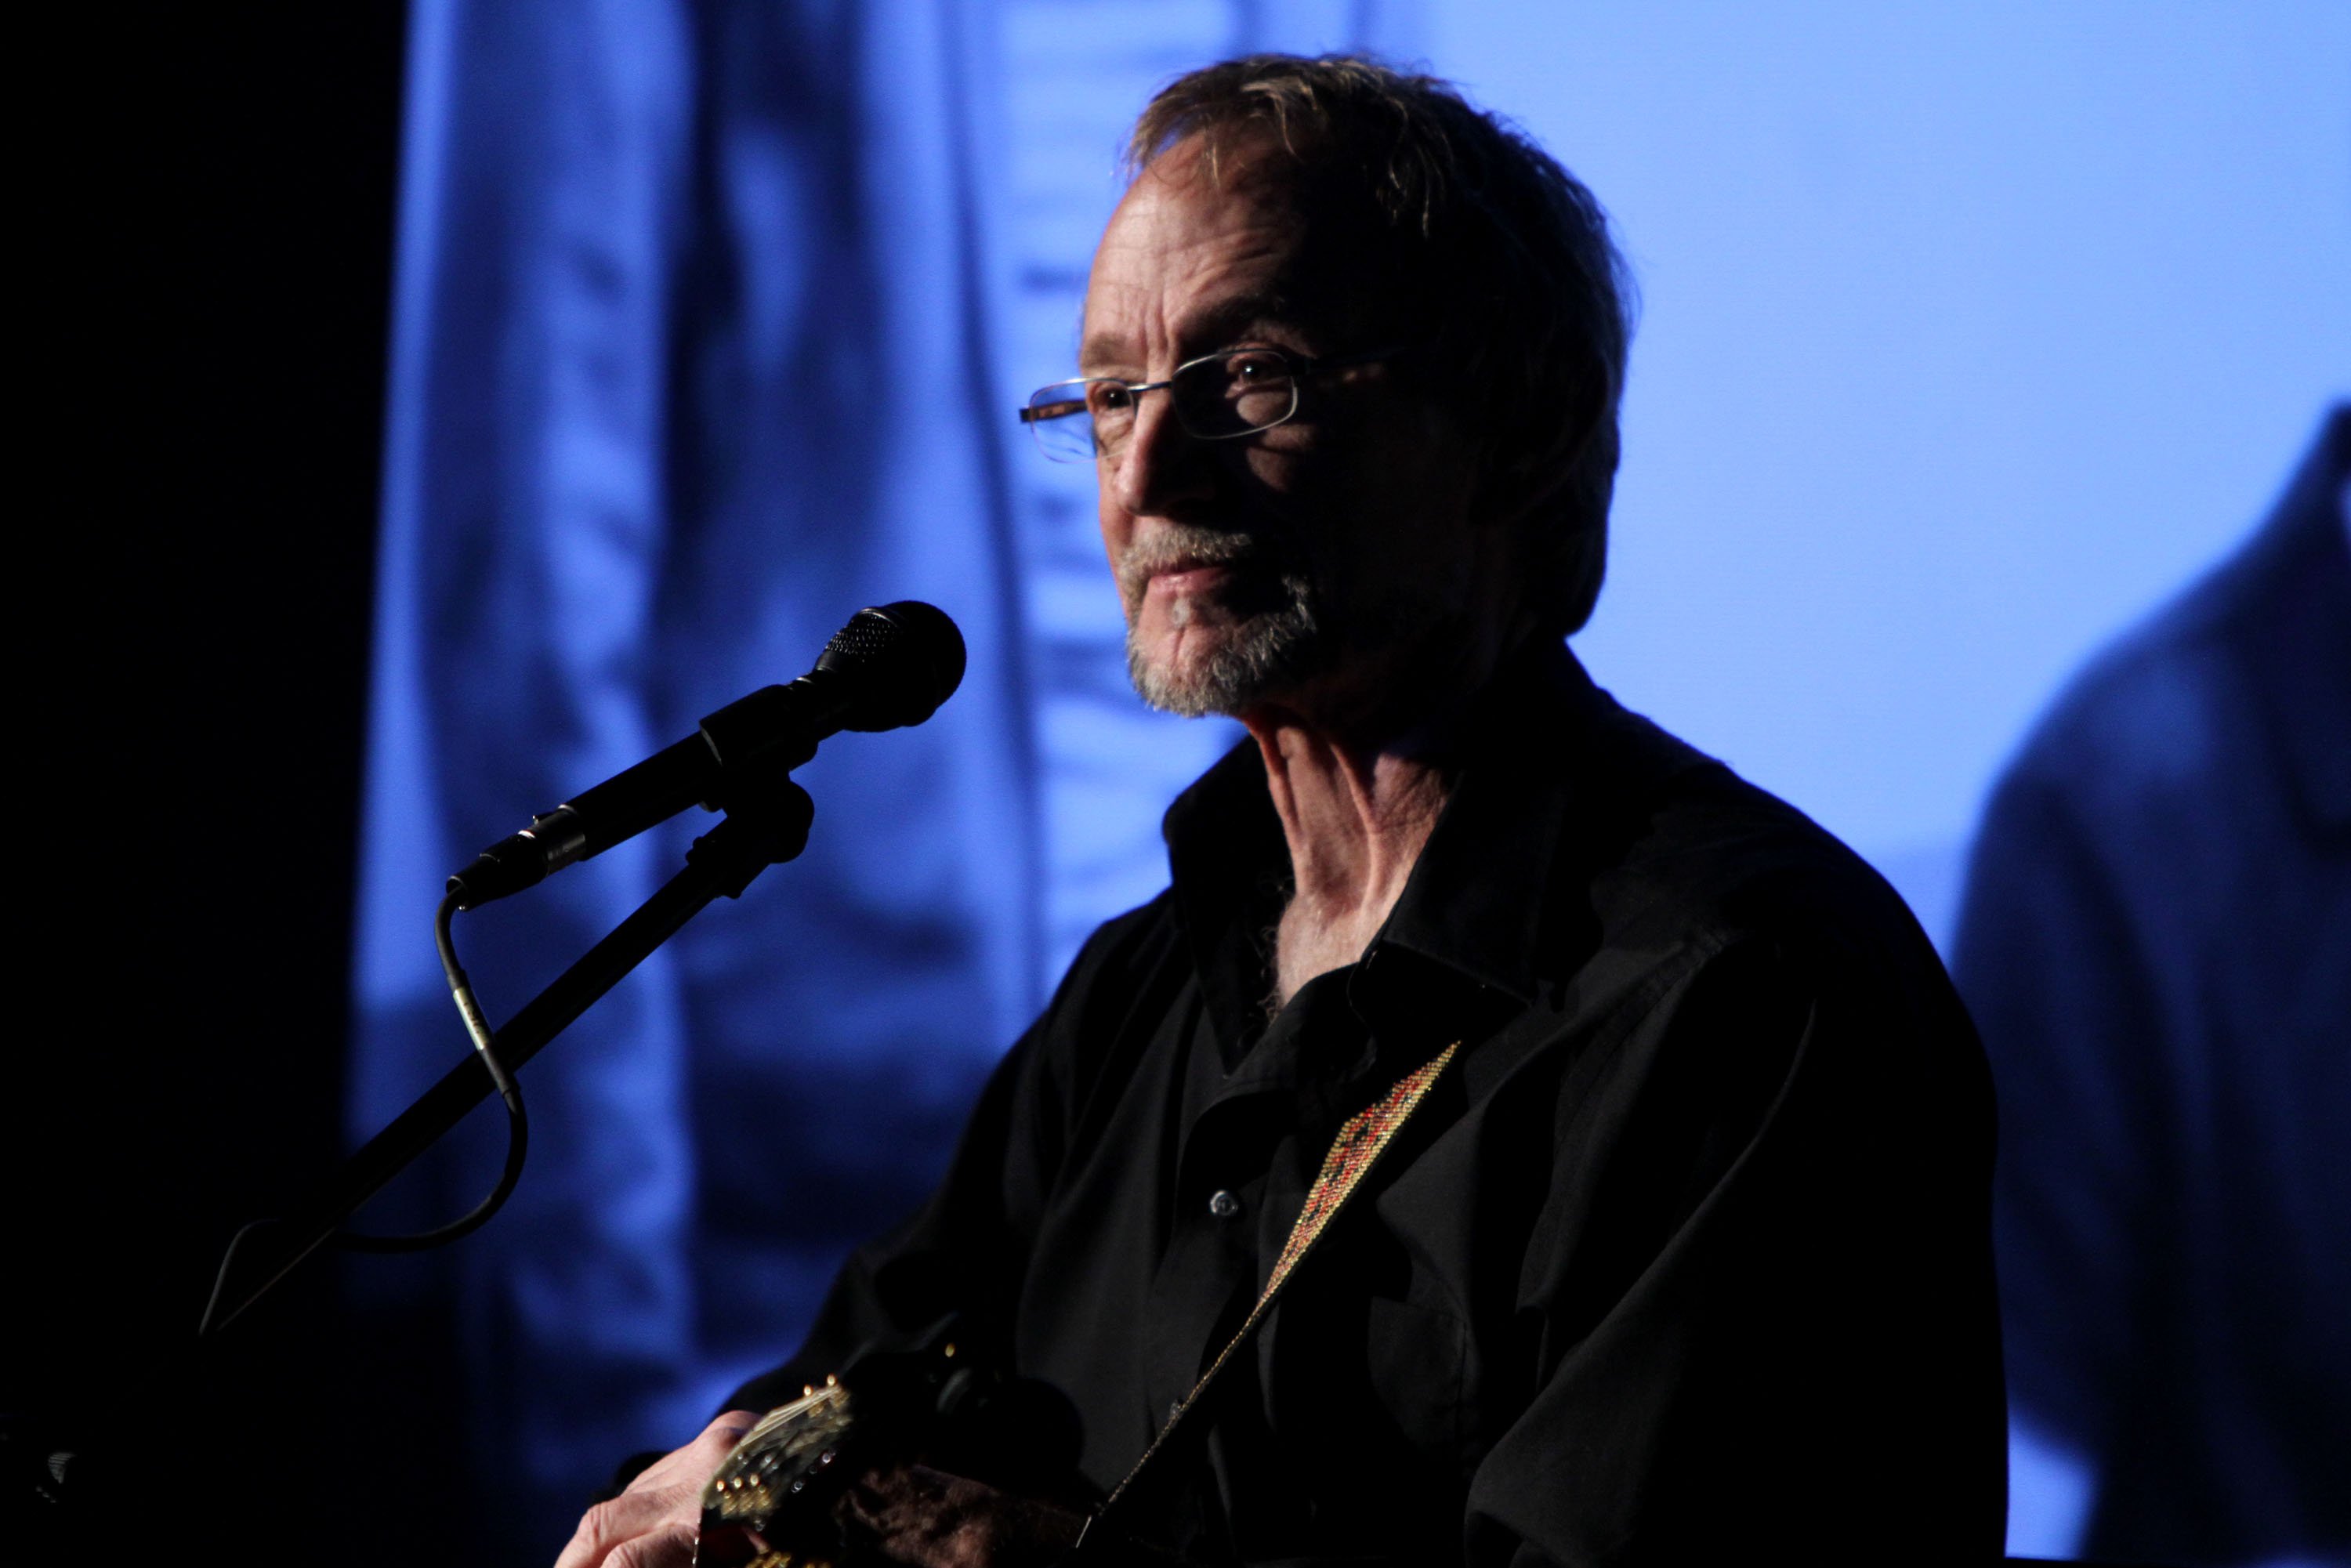 Peter Tork performs at Peter Tork's "In This Generation: My Life in the Monkees and so much more" at The GRAMMY Museum on June 17, 2013 in Los Angeles, California | Source: Getty Images